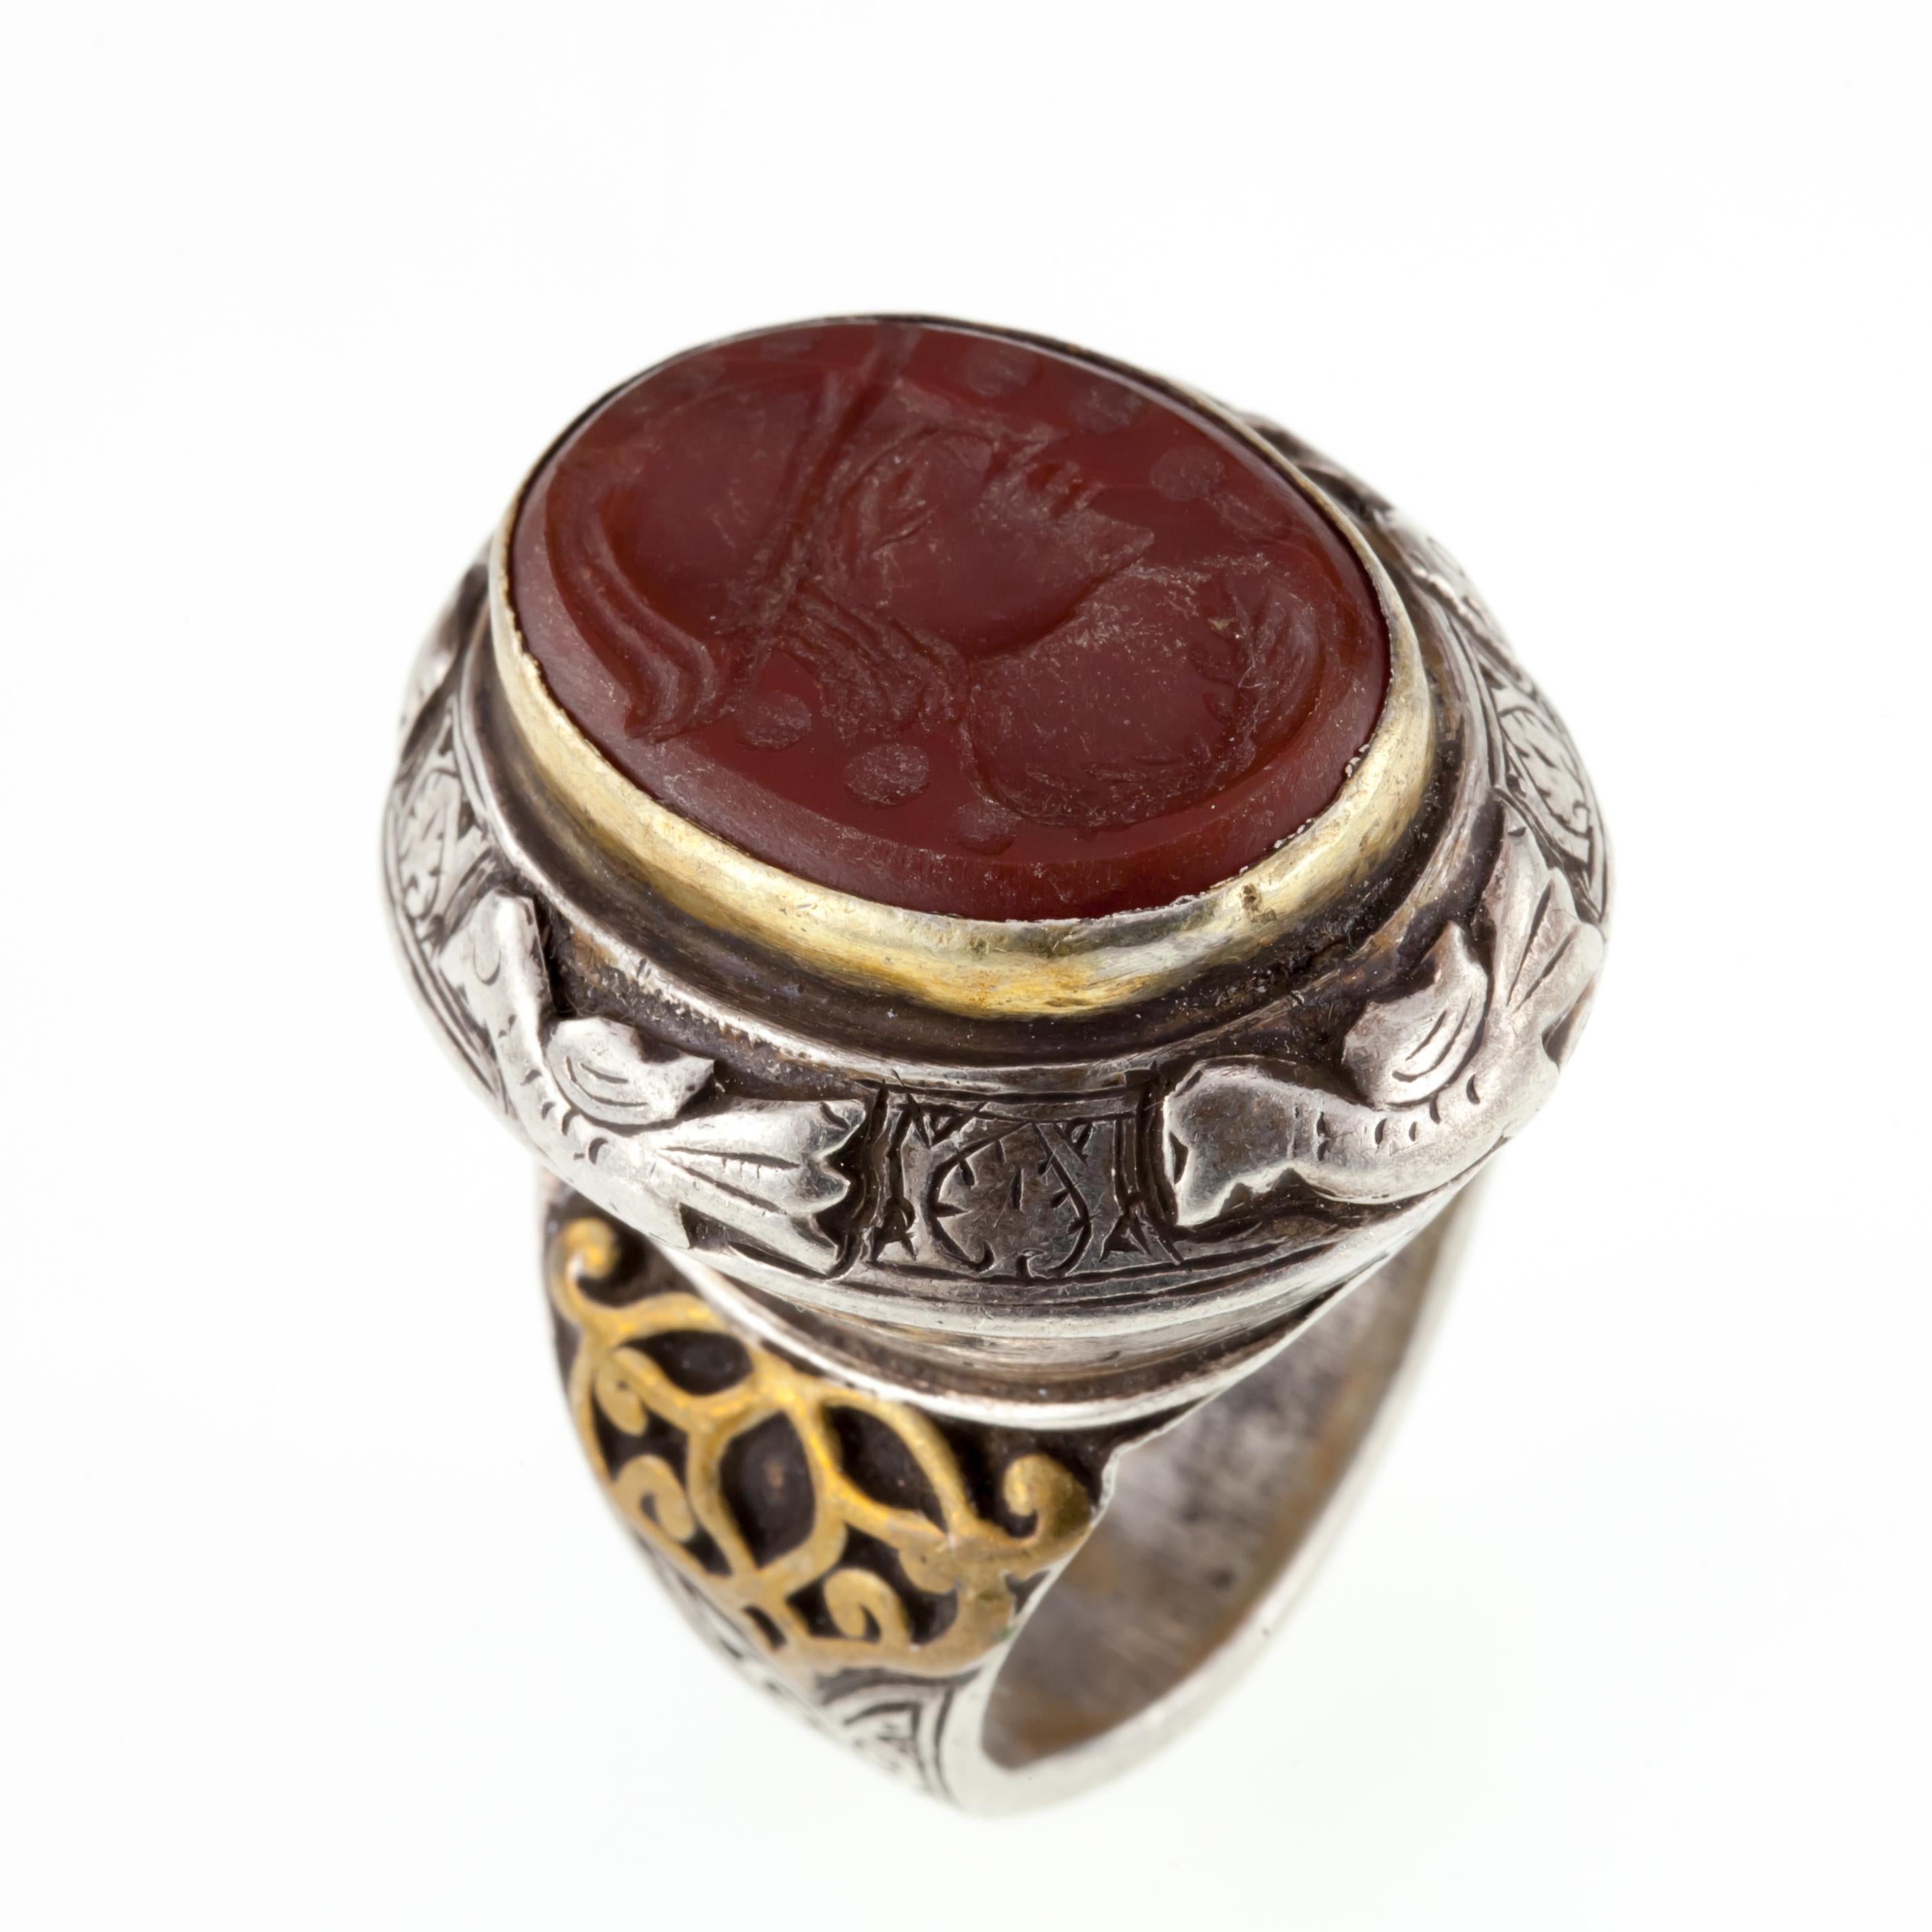 Gorgeous Afghan Intaglio Ring
Features Intricate Repousse Design with Antiqued Accents
Size 9.25
Dimensions of Carnelian = 22 mm x 16 mm
Dimensions of Plaque = 29 mm x 25 mm
Total Mass = 24.8 grams